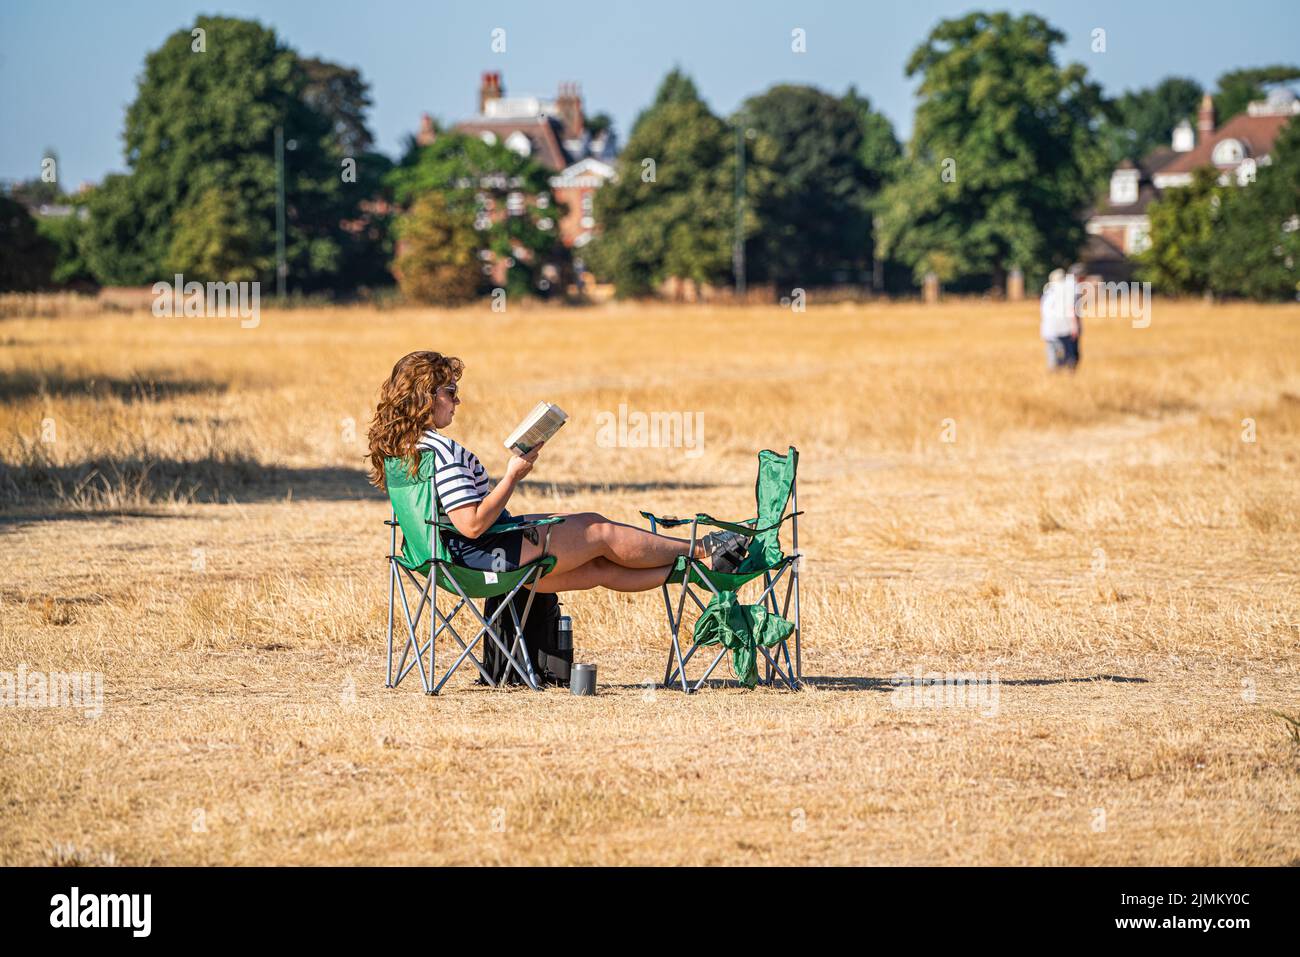 Wimbledon, London, UK. 7 August 2022  A woman sitting with a book on a deckchairs  on a bright morning surrounded by the  parched  grass of Wimbledon Common, south west London  as the hot weather and a lack of rainfall continue to grip much of the south of England and the UK, with temperatures expected to reach  above 30celsius  by next week Credit. amer ghazzal/Alamy Live News Stock Photo